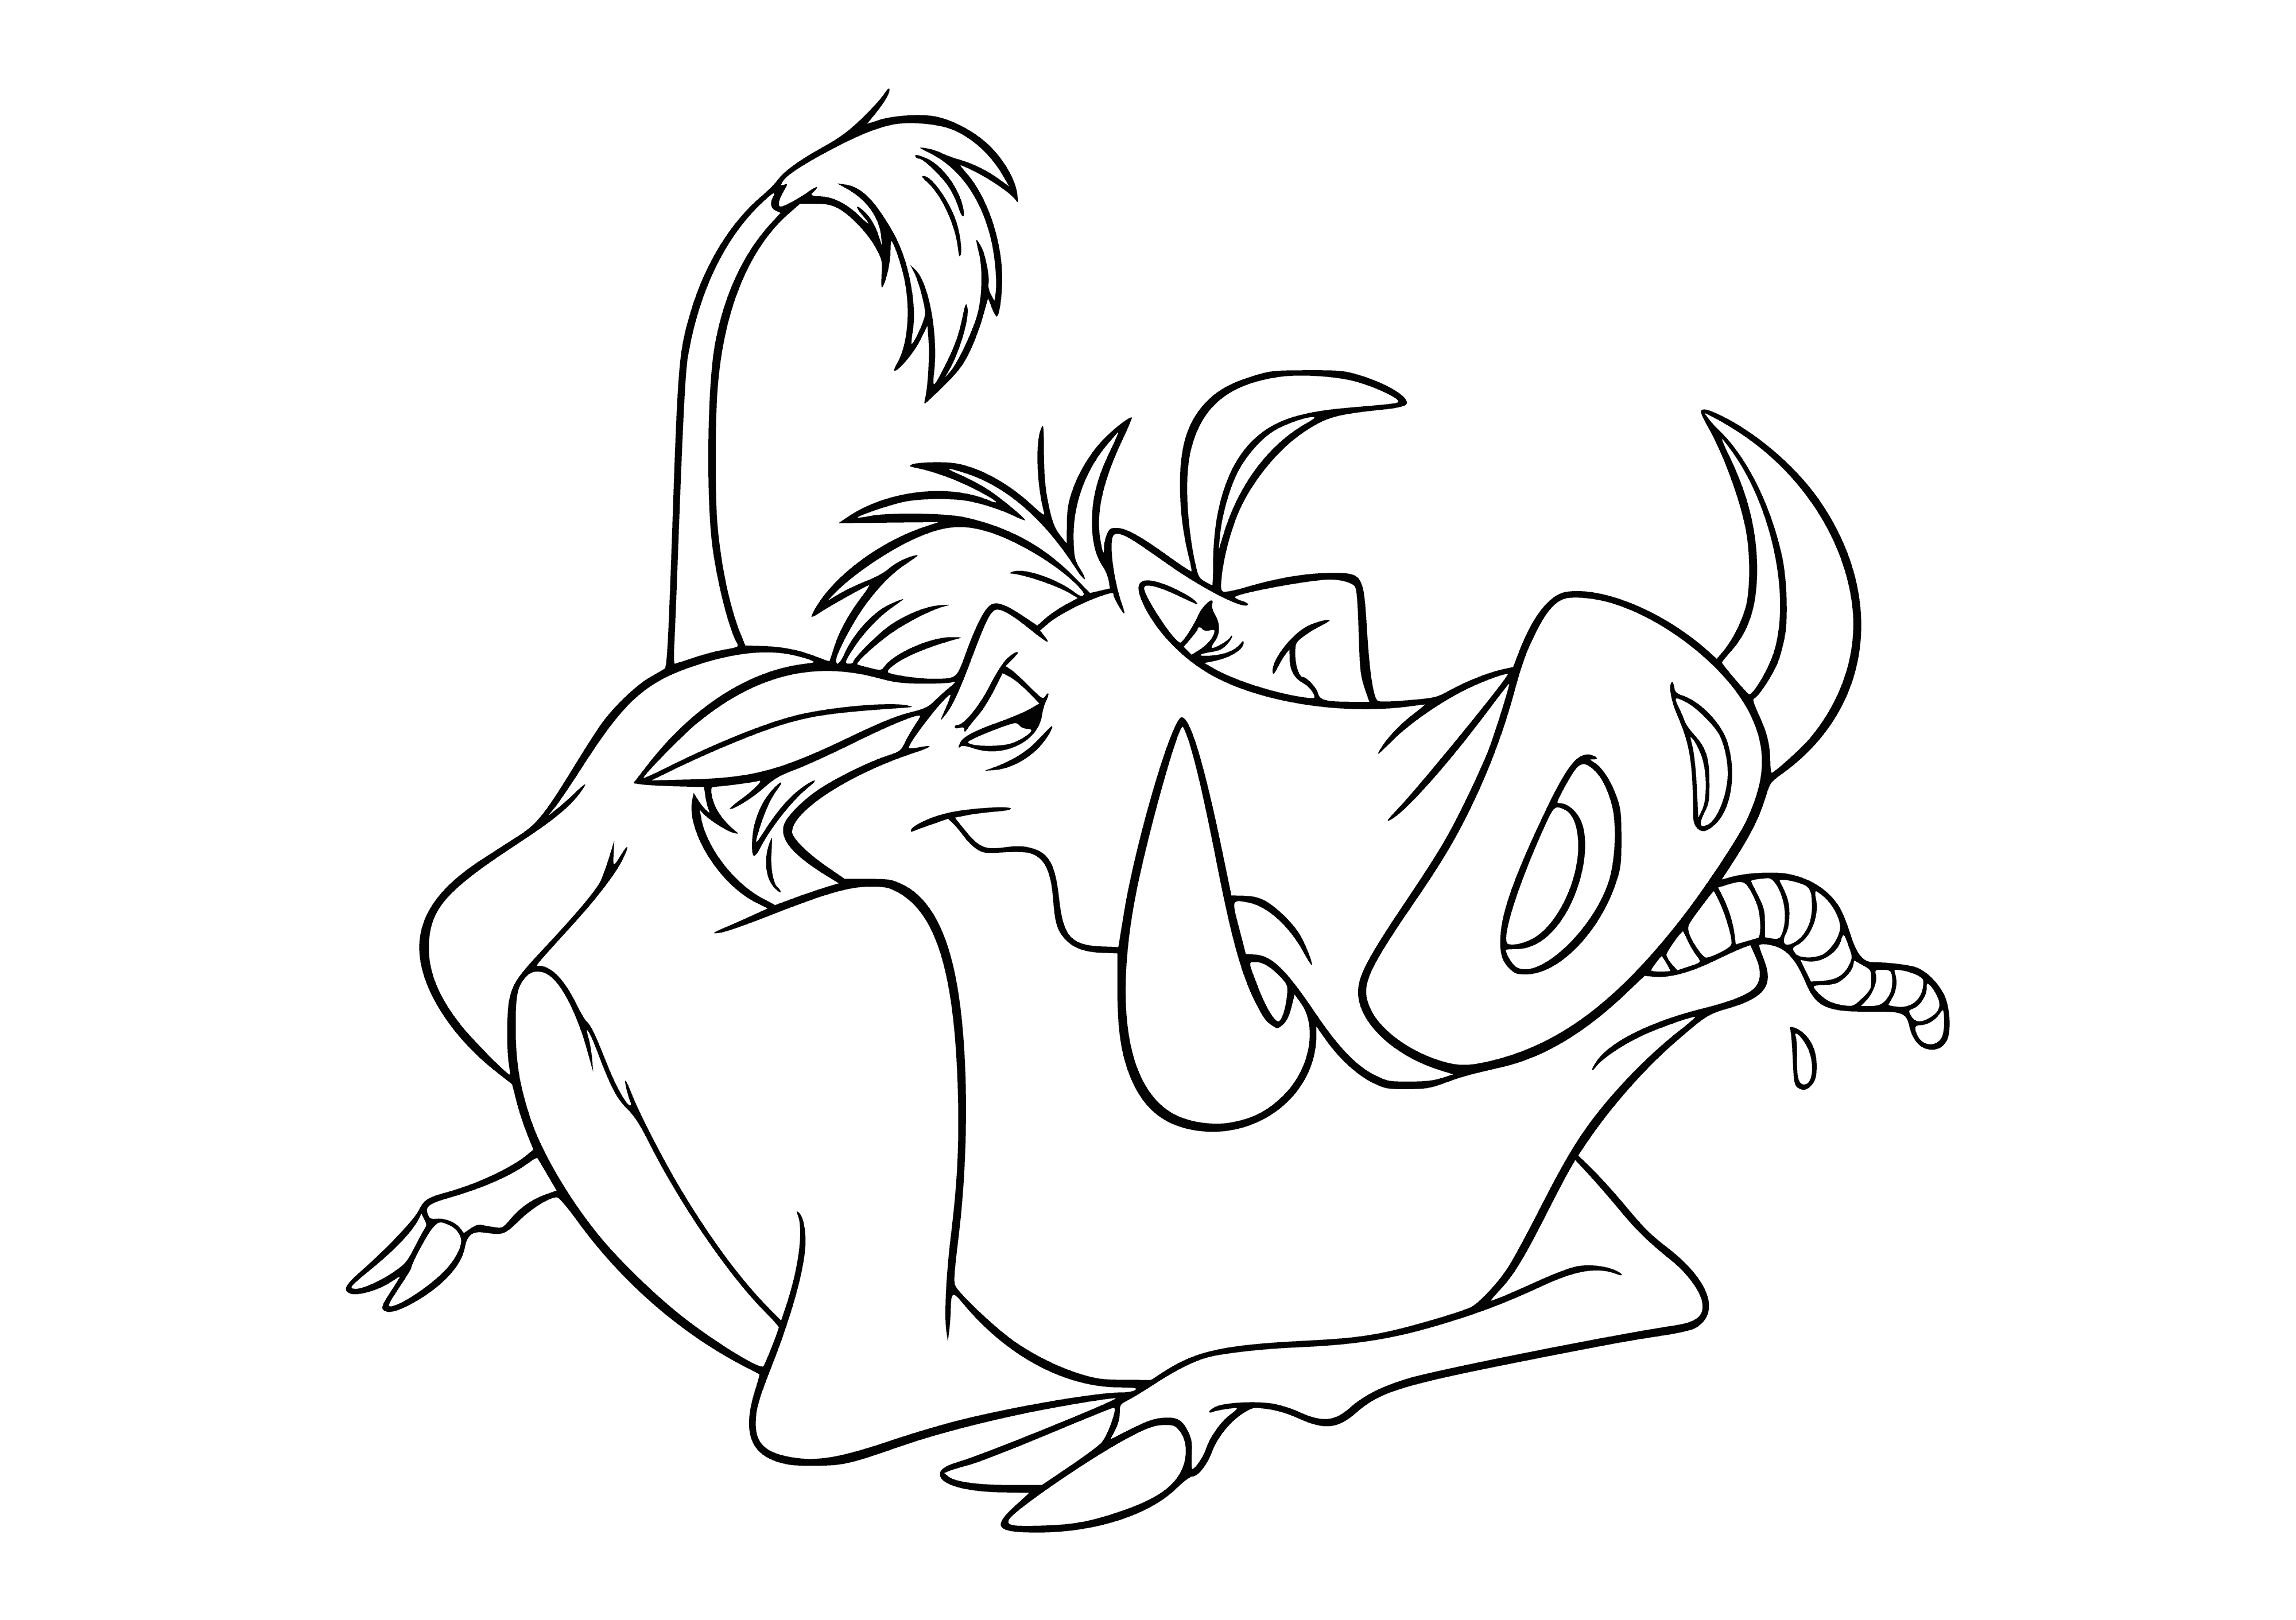 Pumba boar coloring page